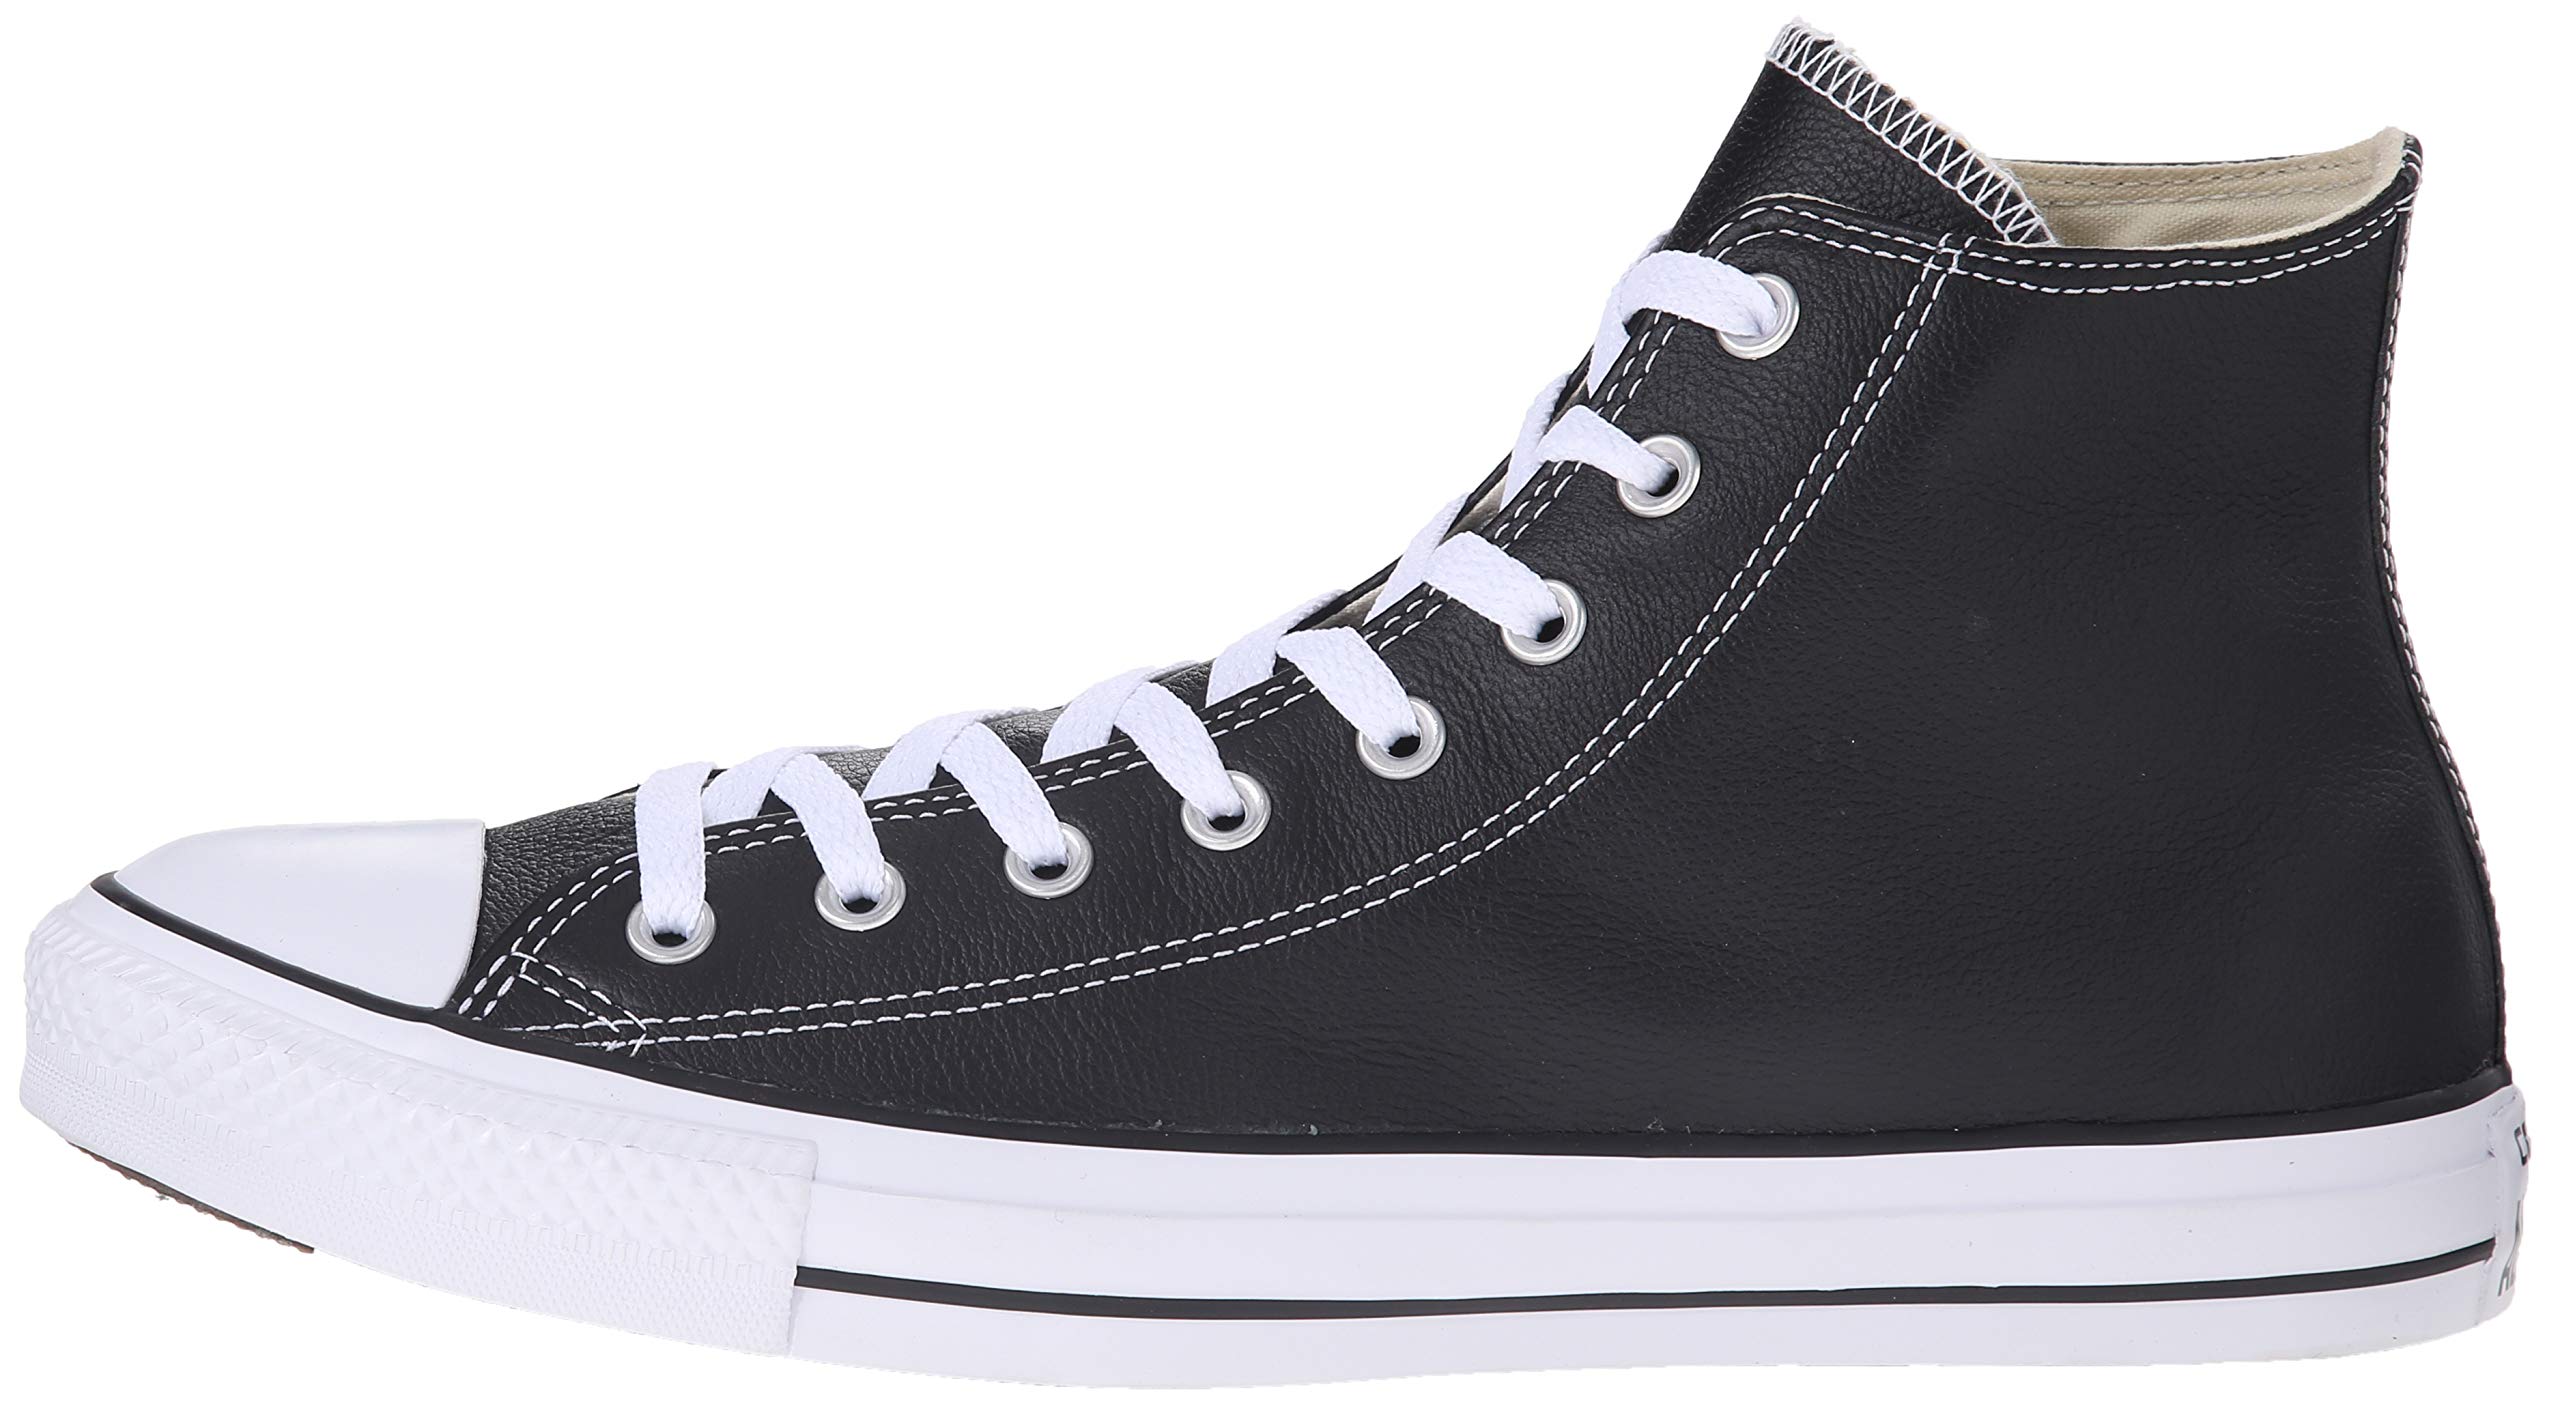 Converse Chuck Taylor All Star Hi Leather Sneakers Black - image 2 of 8